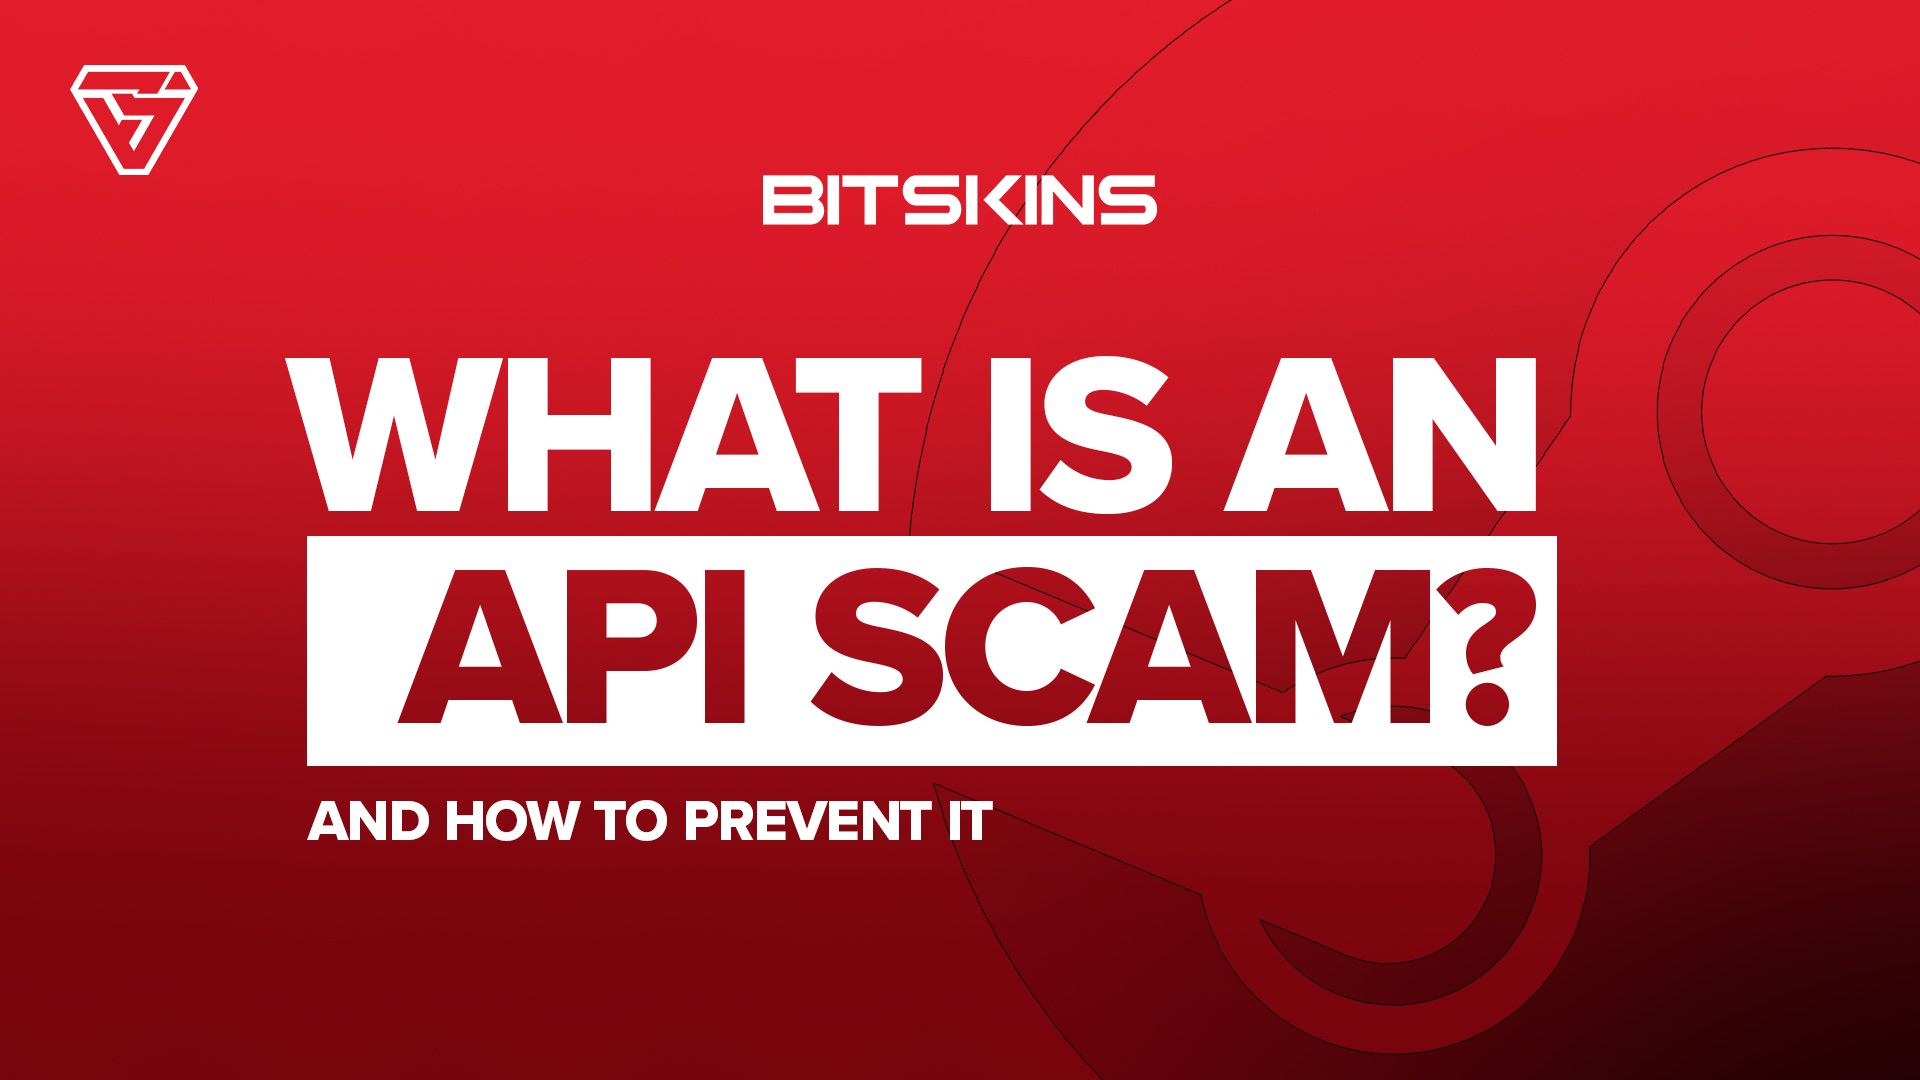 API SCAM - What you should know and how to stay safe